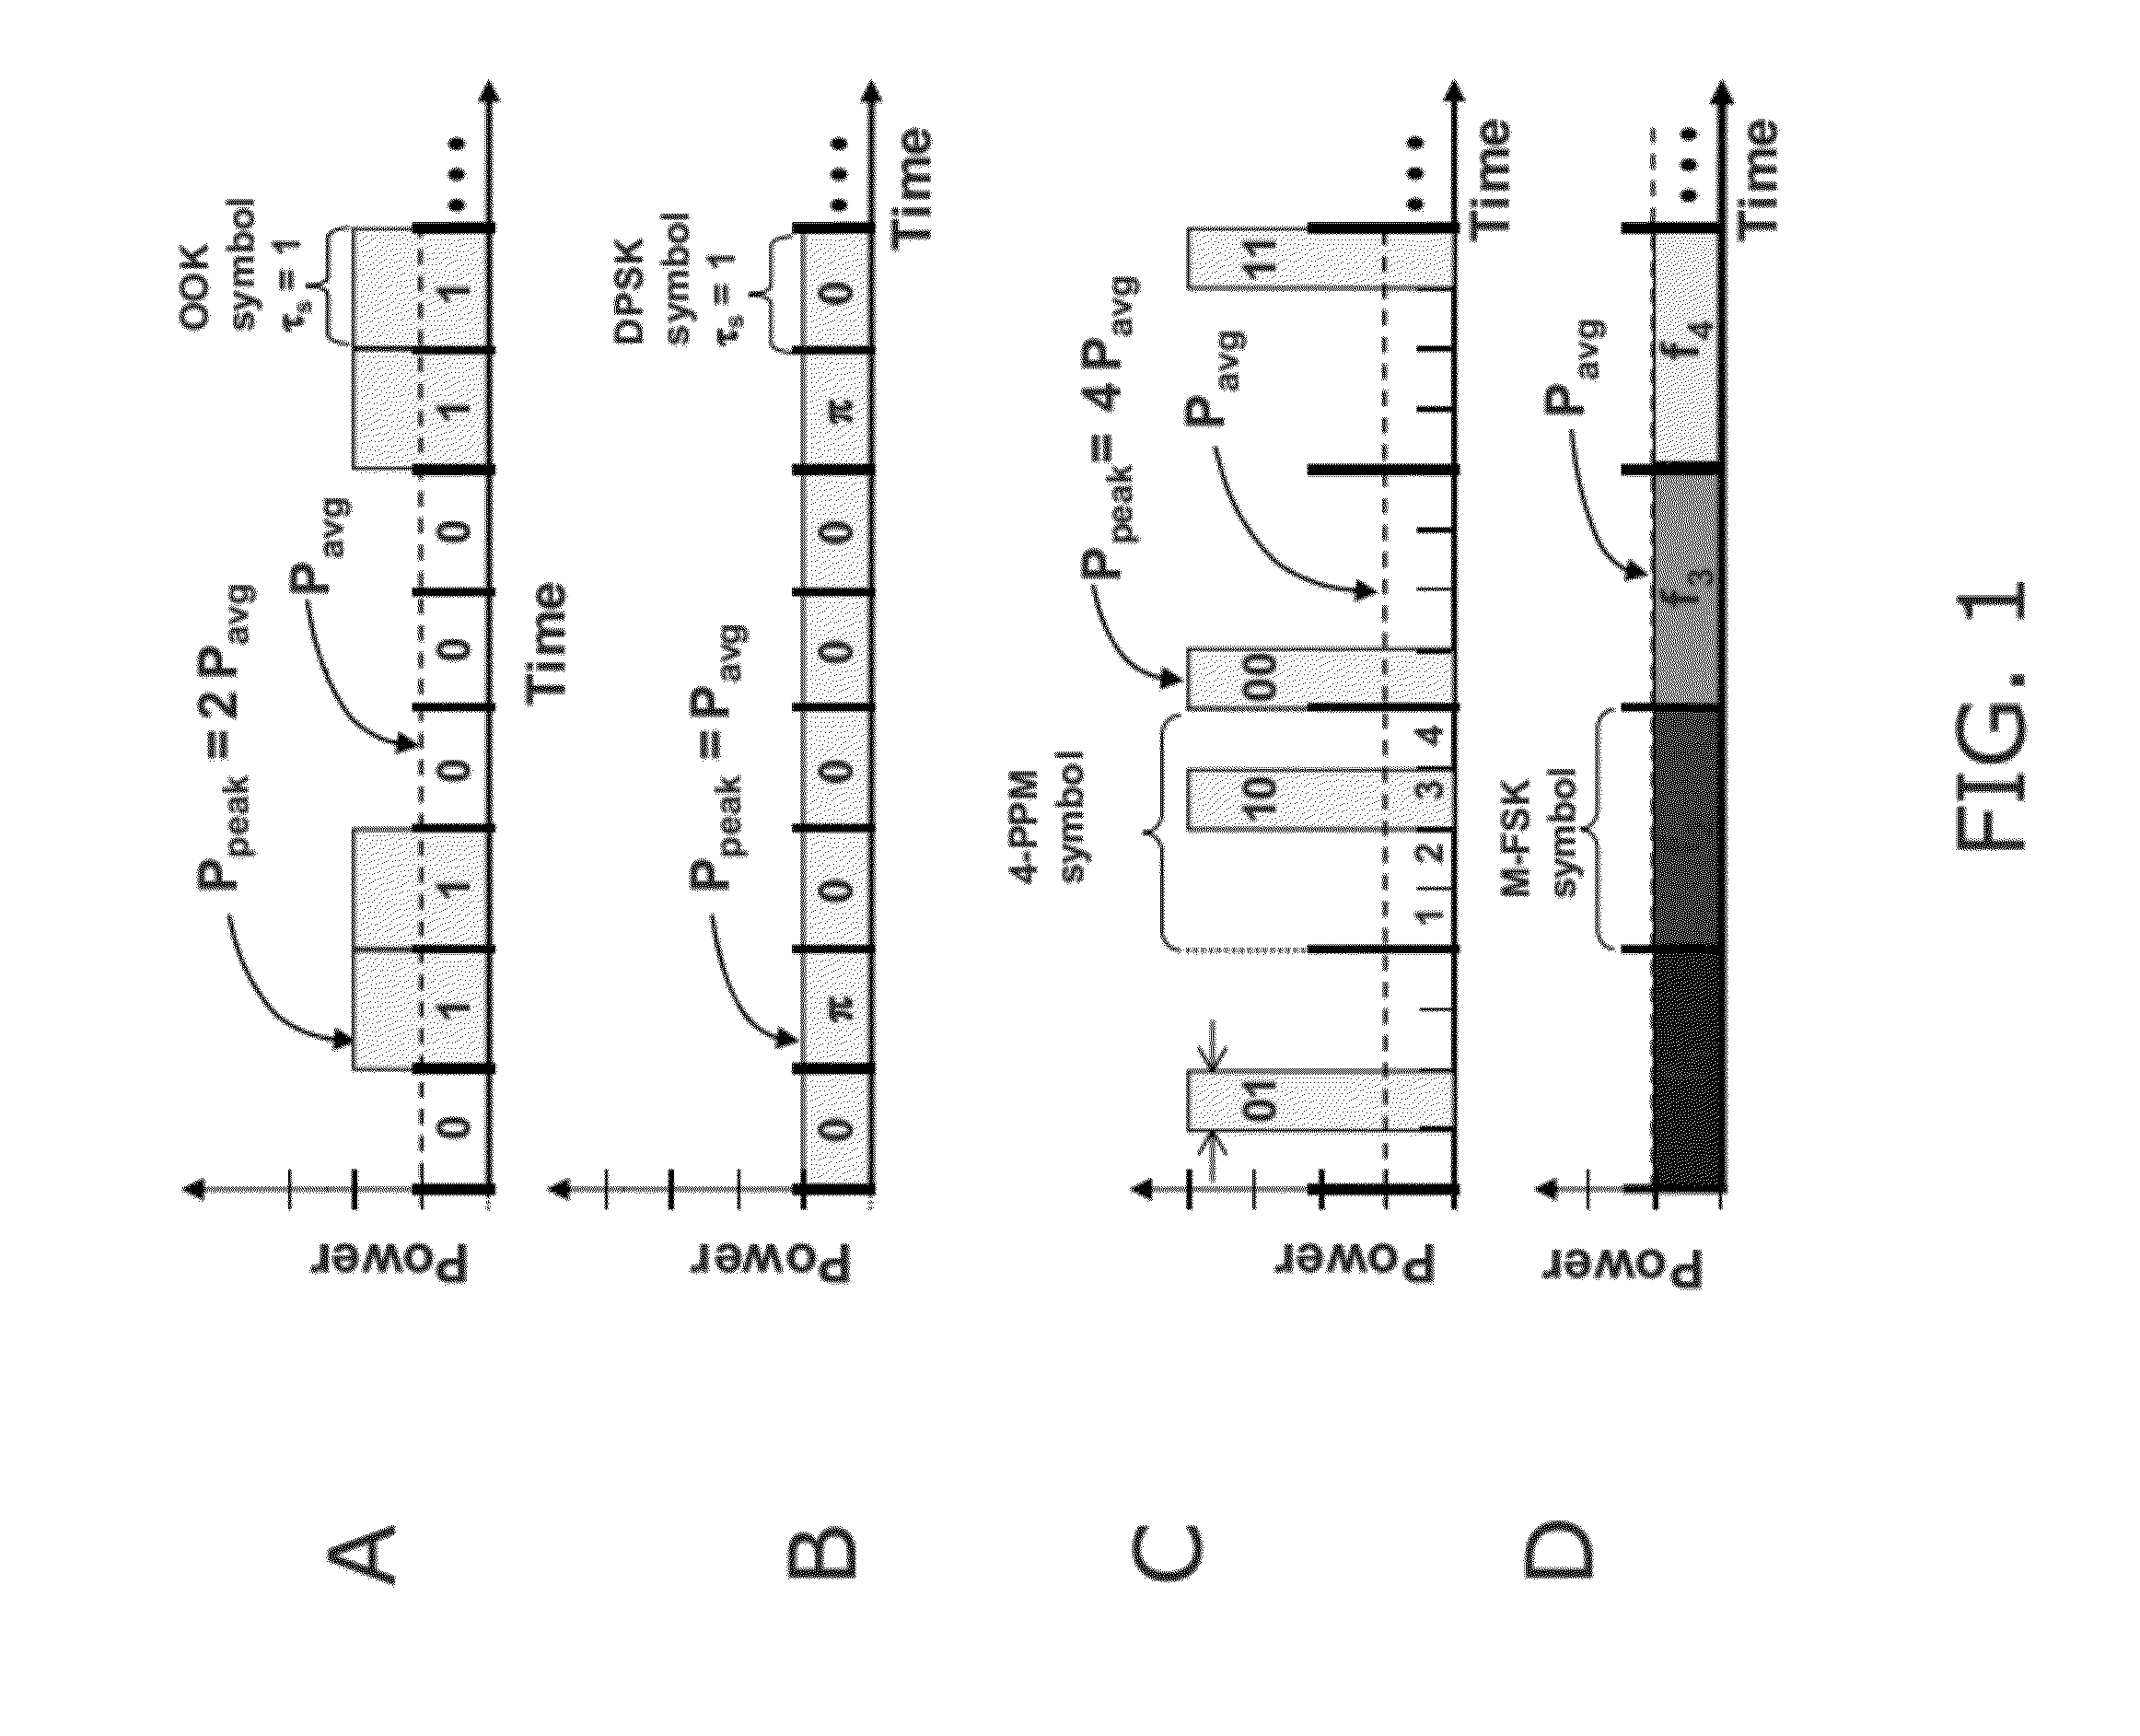 Optical receiver configurable to accommodate a variety of modulation formats